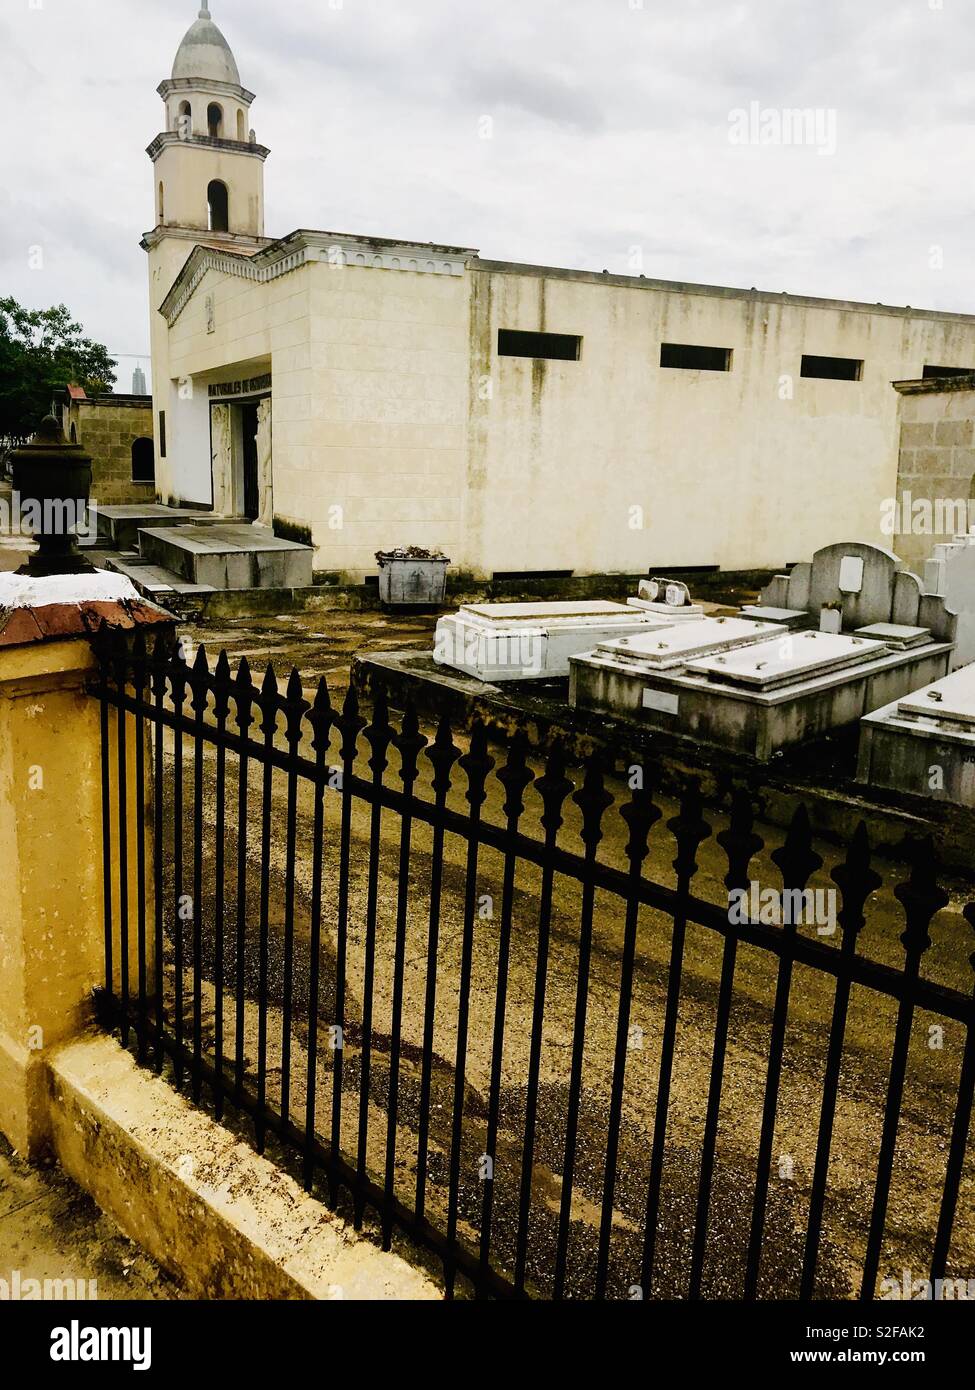 Colon Cemetery is one of the most important cemeteries in the world and is one of the most important in Latin America in historic and architecture, Colon is a catholic cemetery. Stock Photo